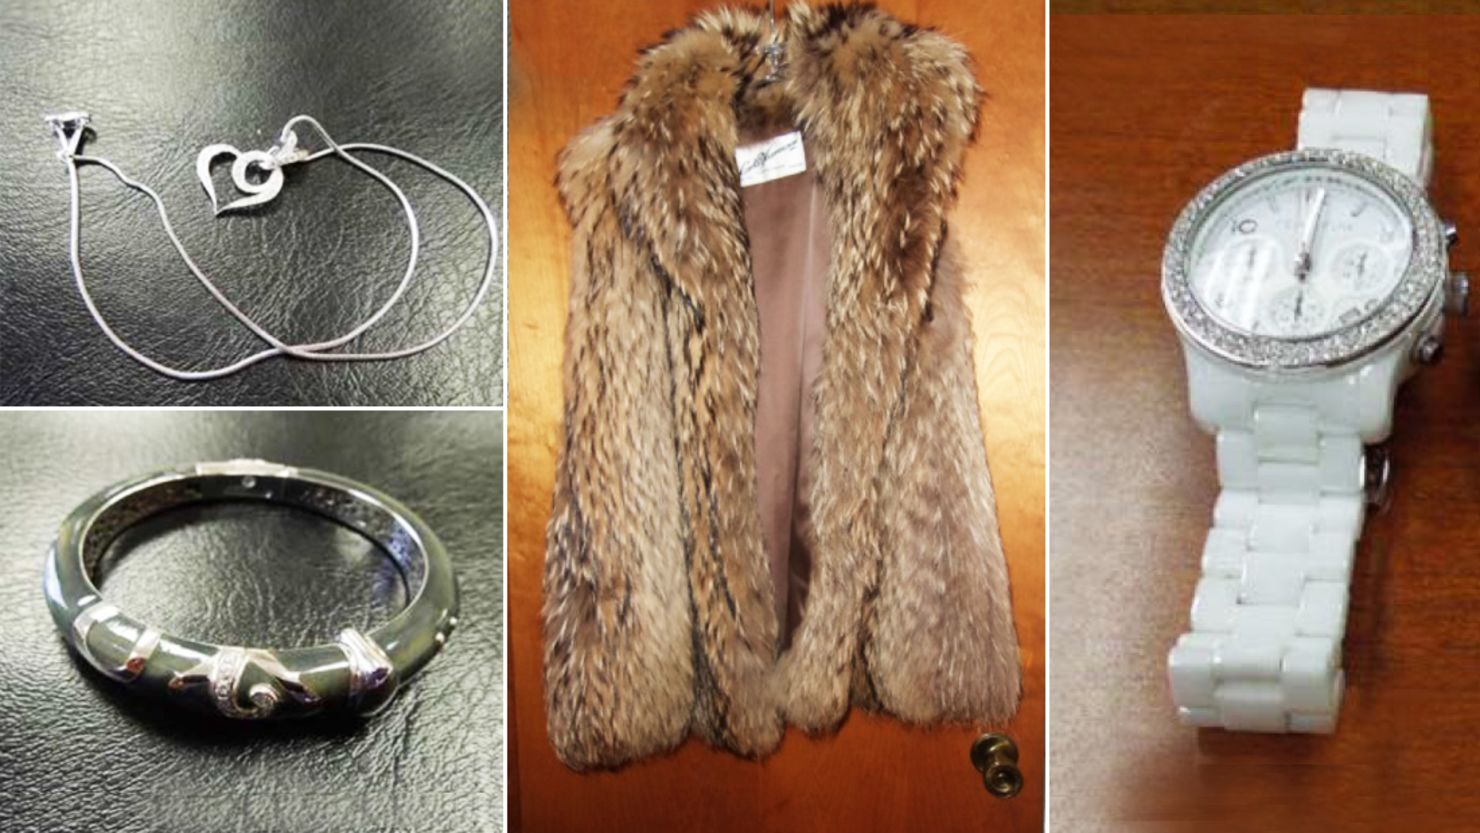 A fur coat, jewelry and a watch: Items that cashier Cynthia Mills is accused of purchasing after she allegedly embezzled $9.5 million from her former employer.